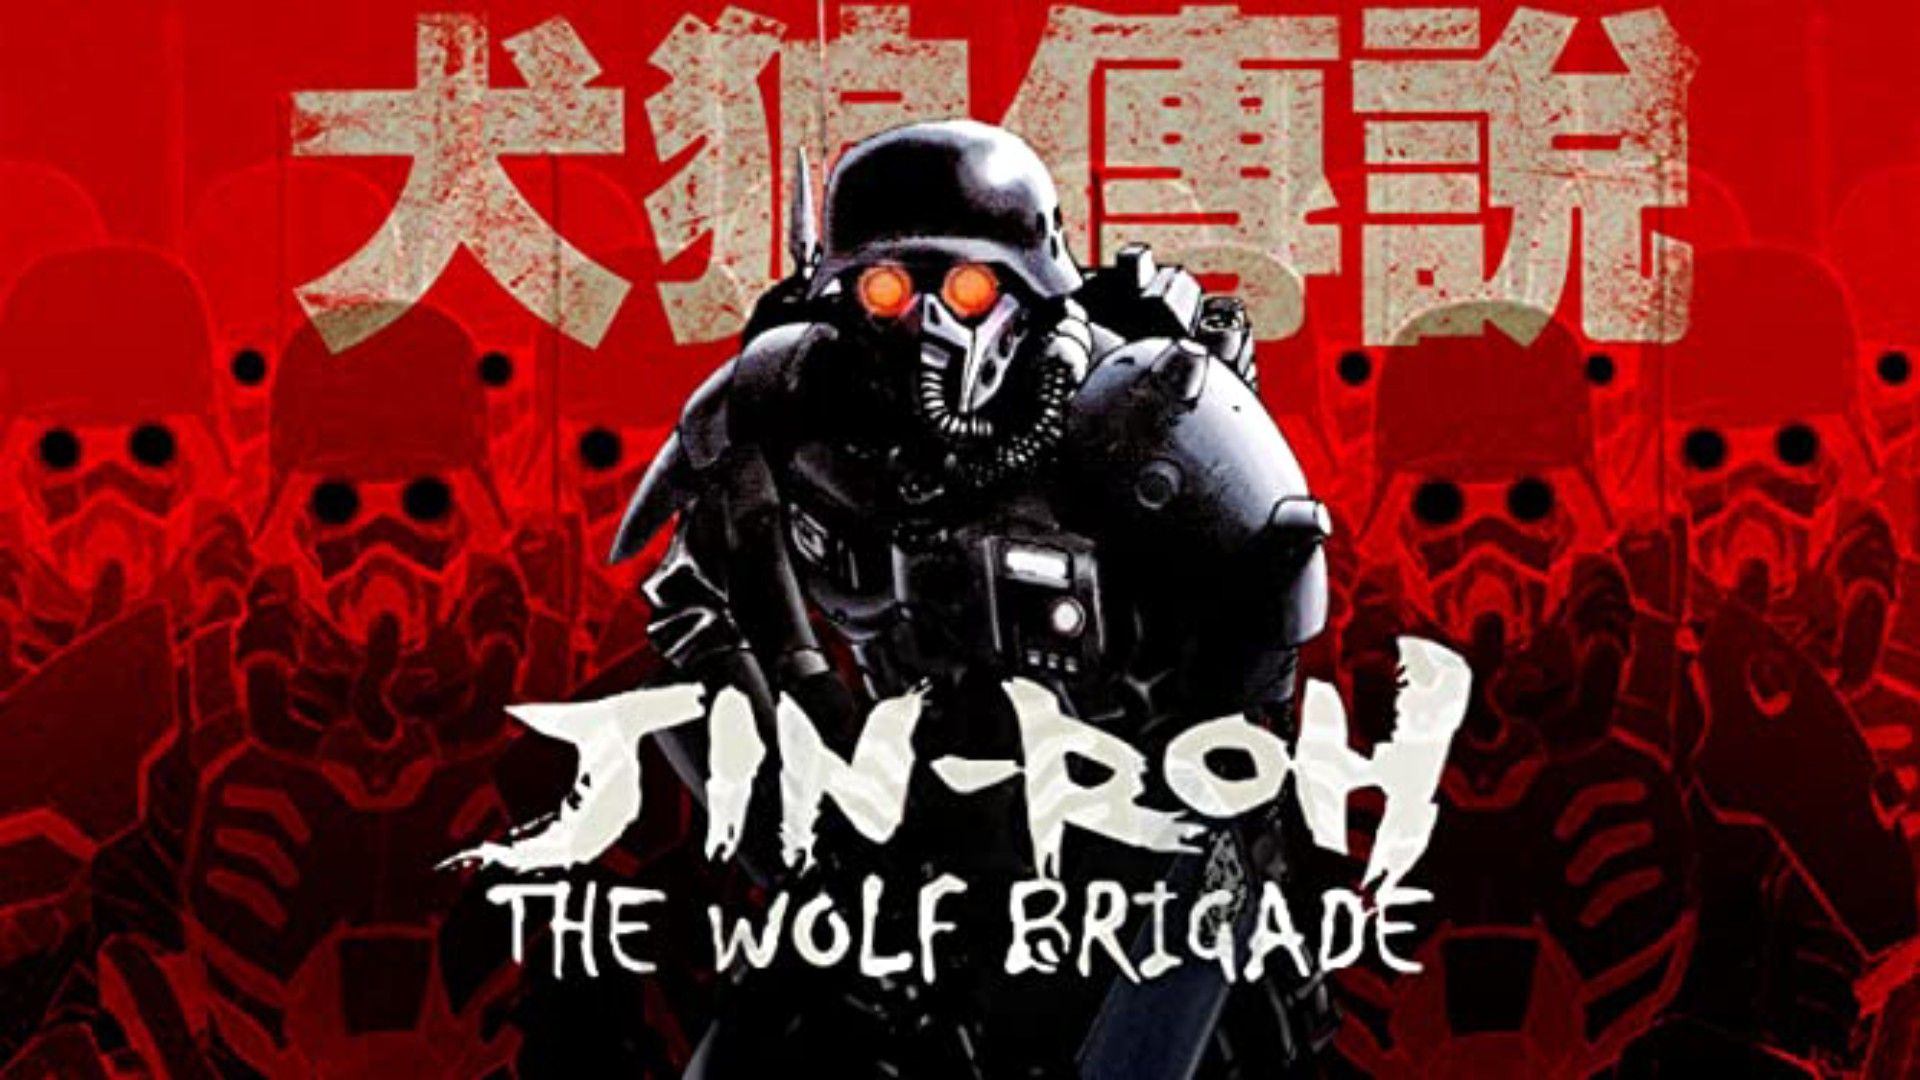 Anime Abandon Jin Roh The Wolf Brigade by PepperJAQ on DeviantArt